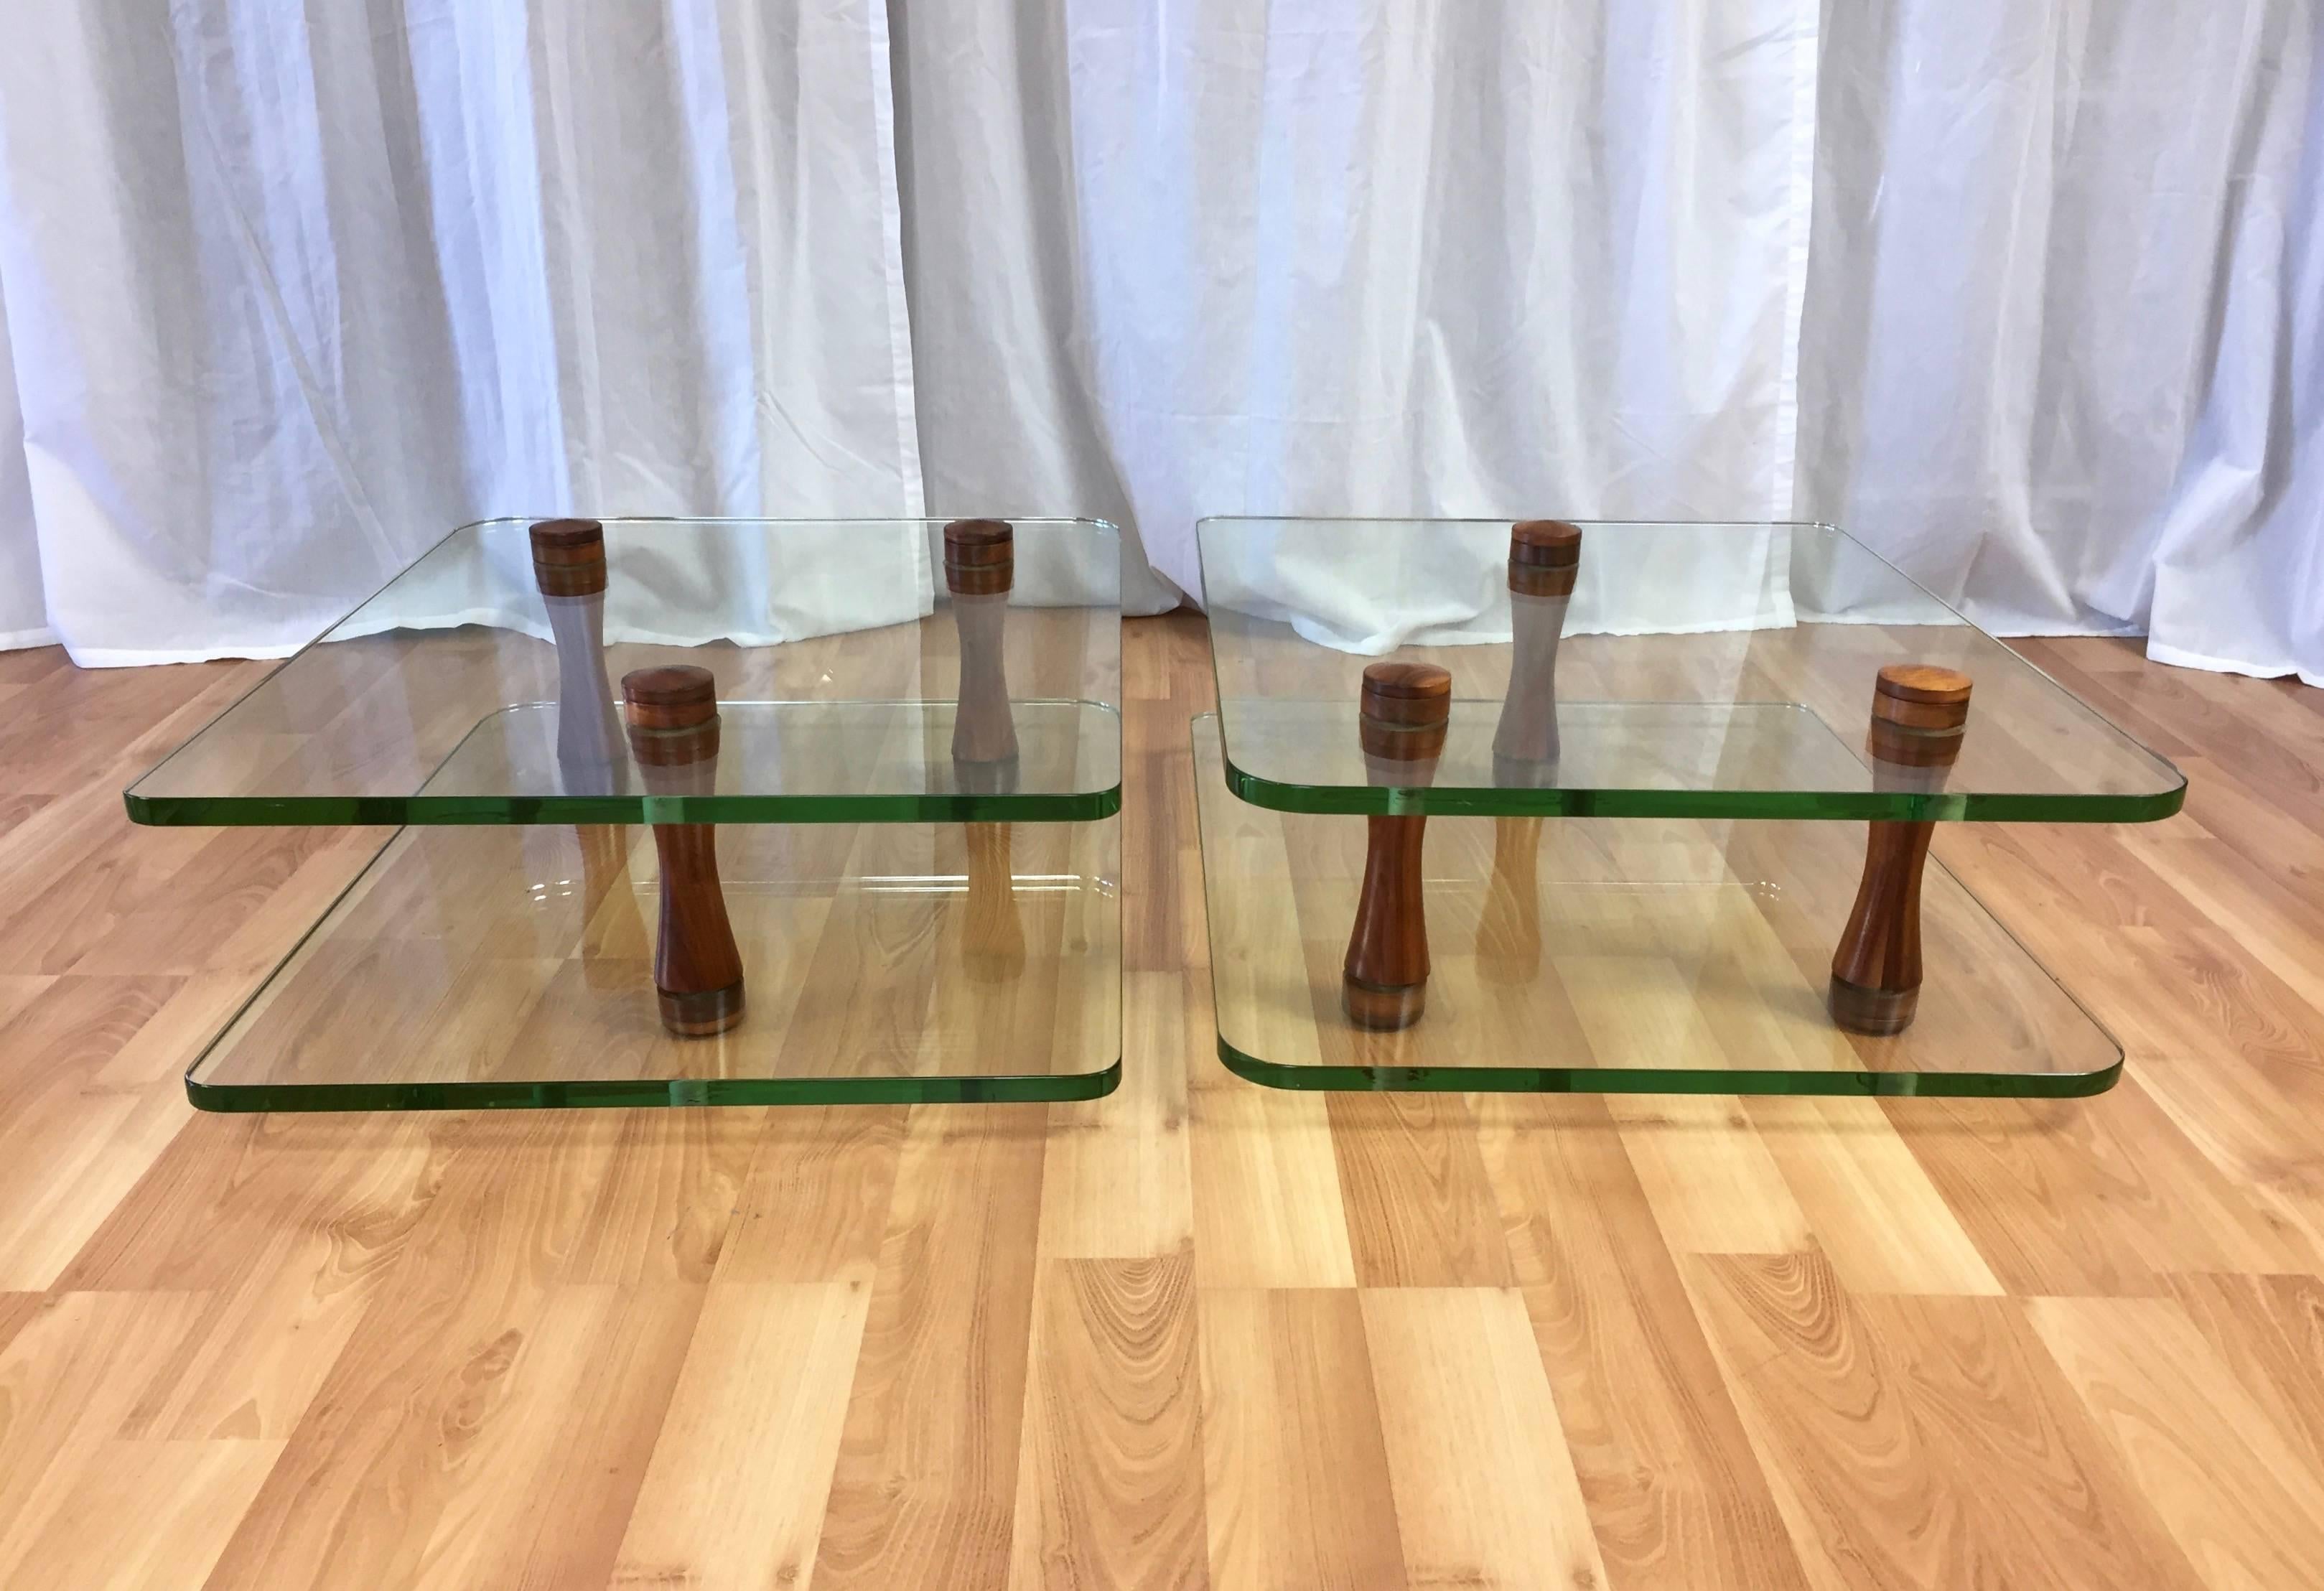 A rare pair of low two-tier glass and walnut end tables or occasional tables designed by Gilbert Rohde for Herman Miller.

Simple yet visually striking Mid-Century Modern design features a trio of solid walnut spindles that intersect and support